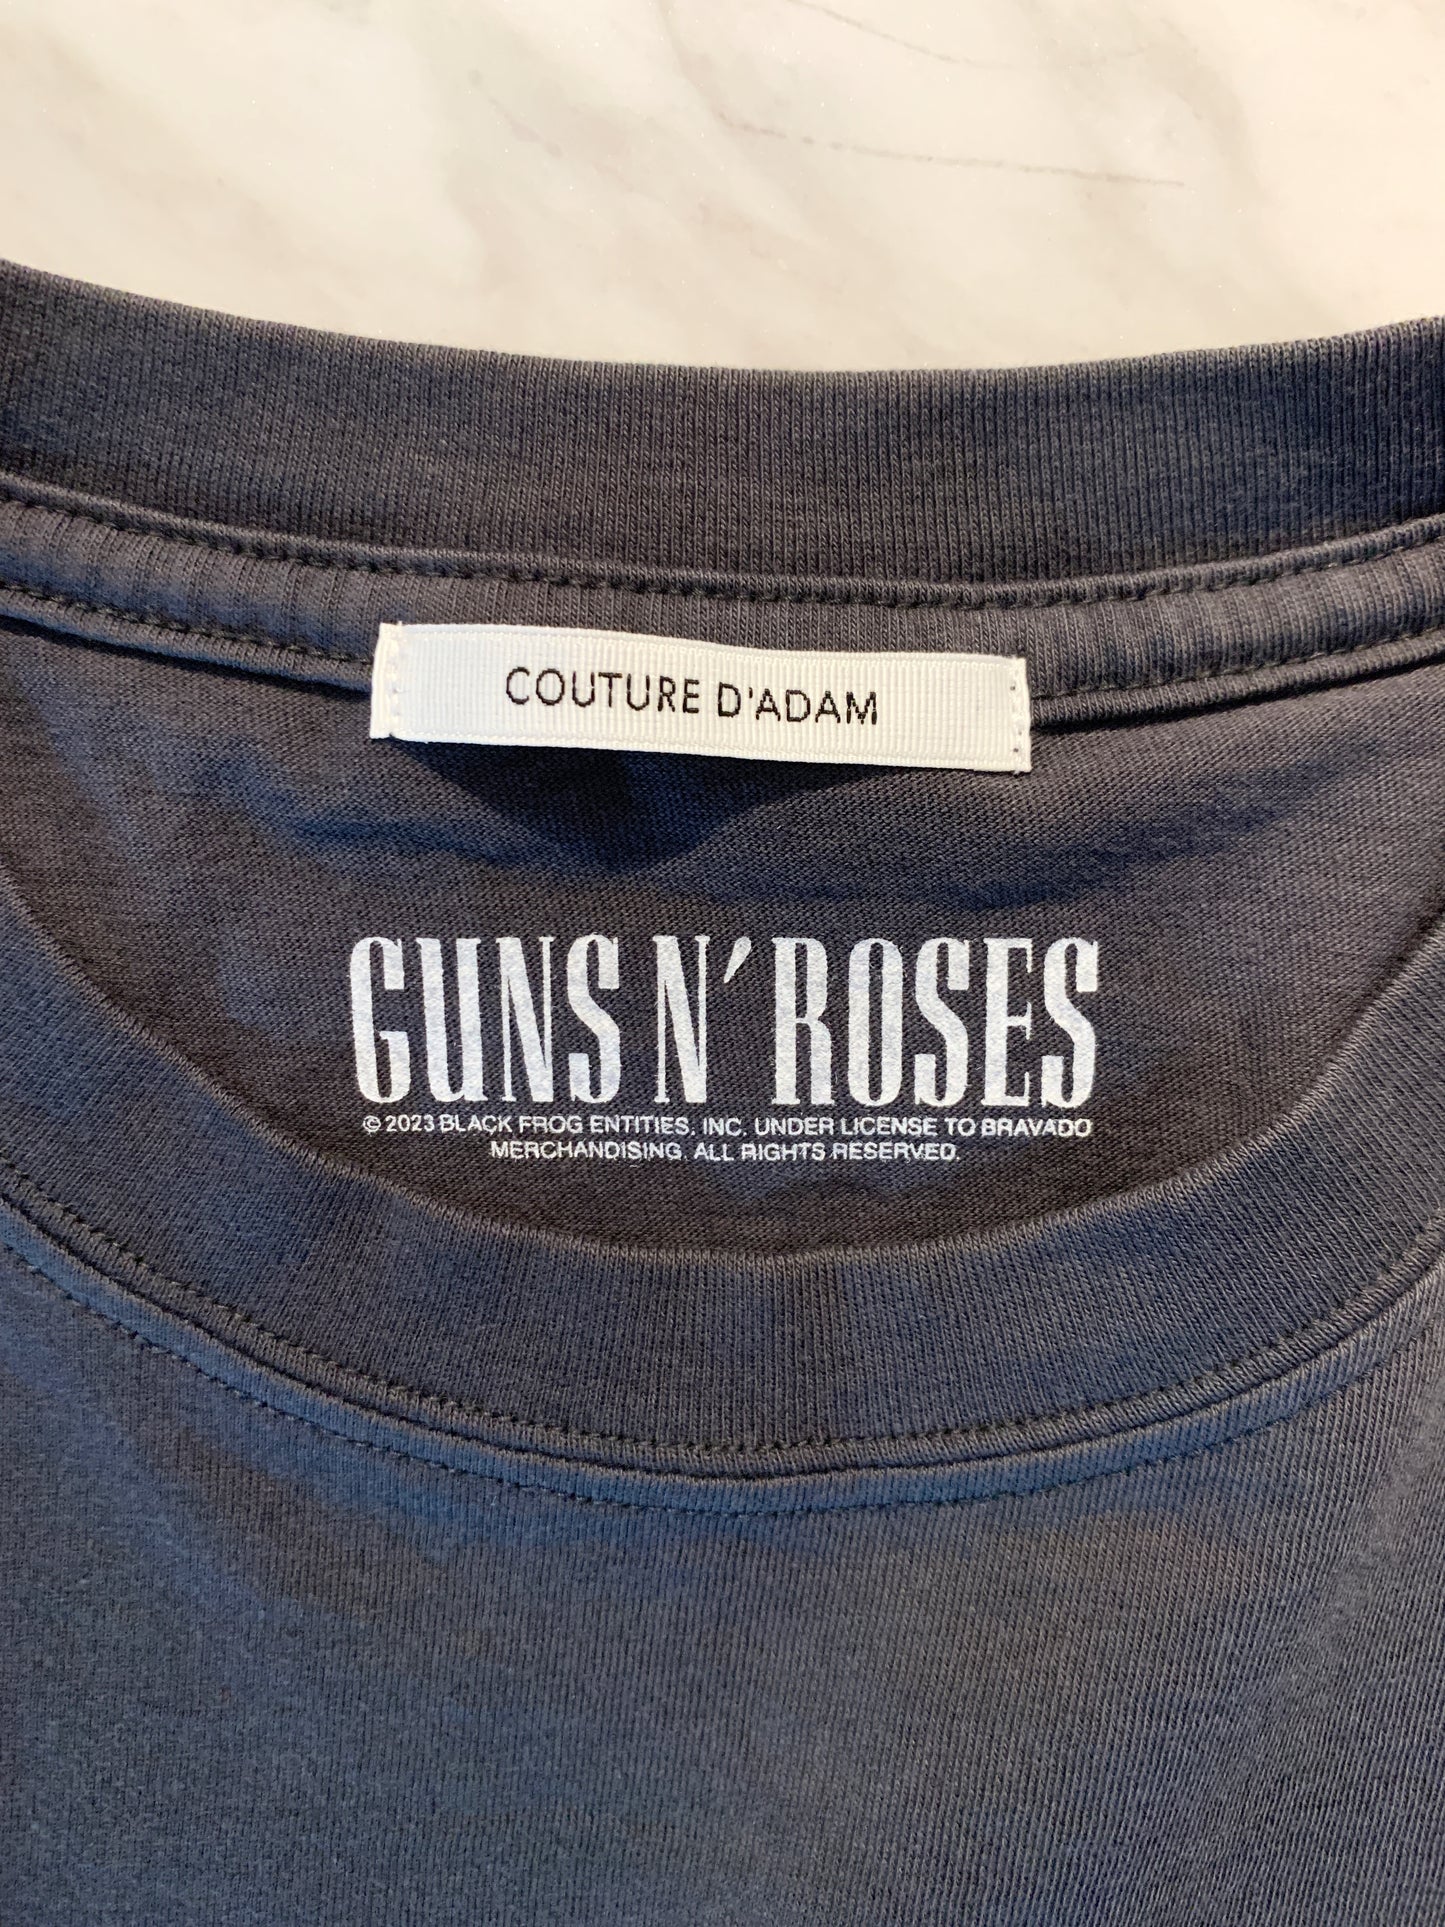 Ｇuns N’ roses graphic T-shirts